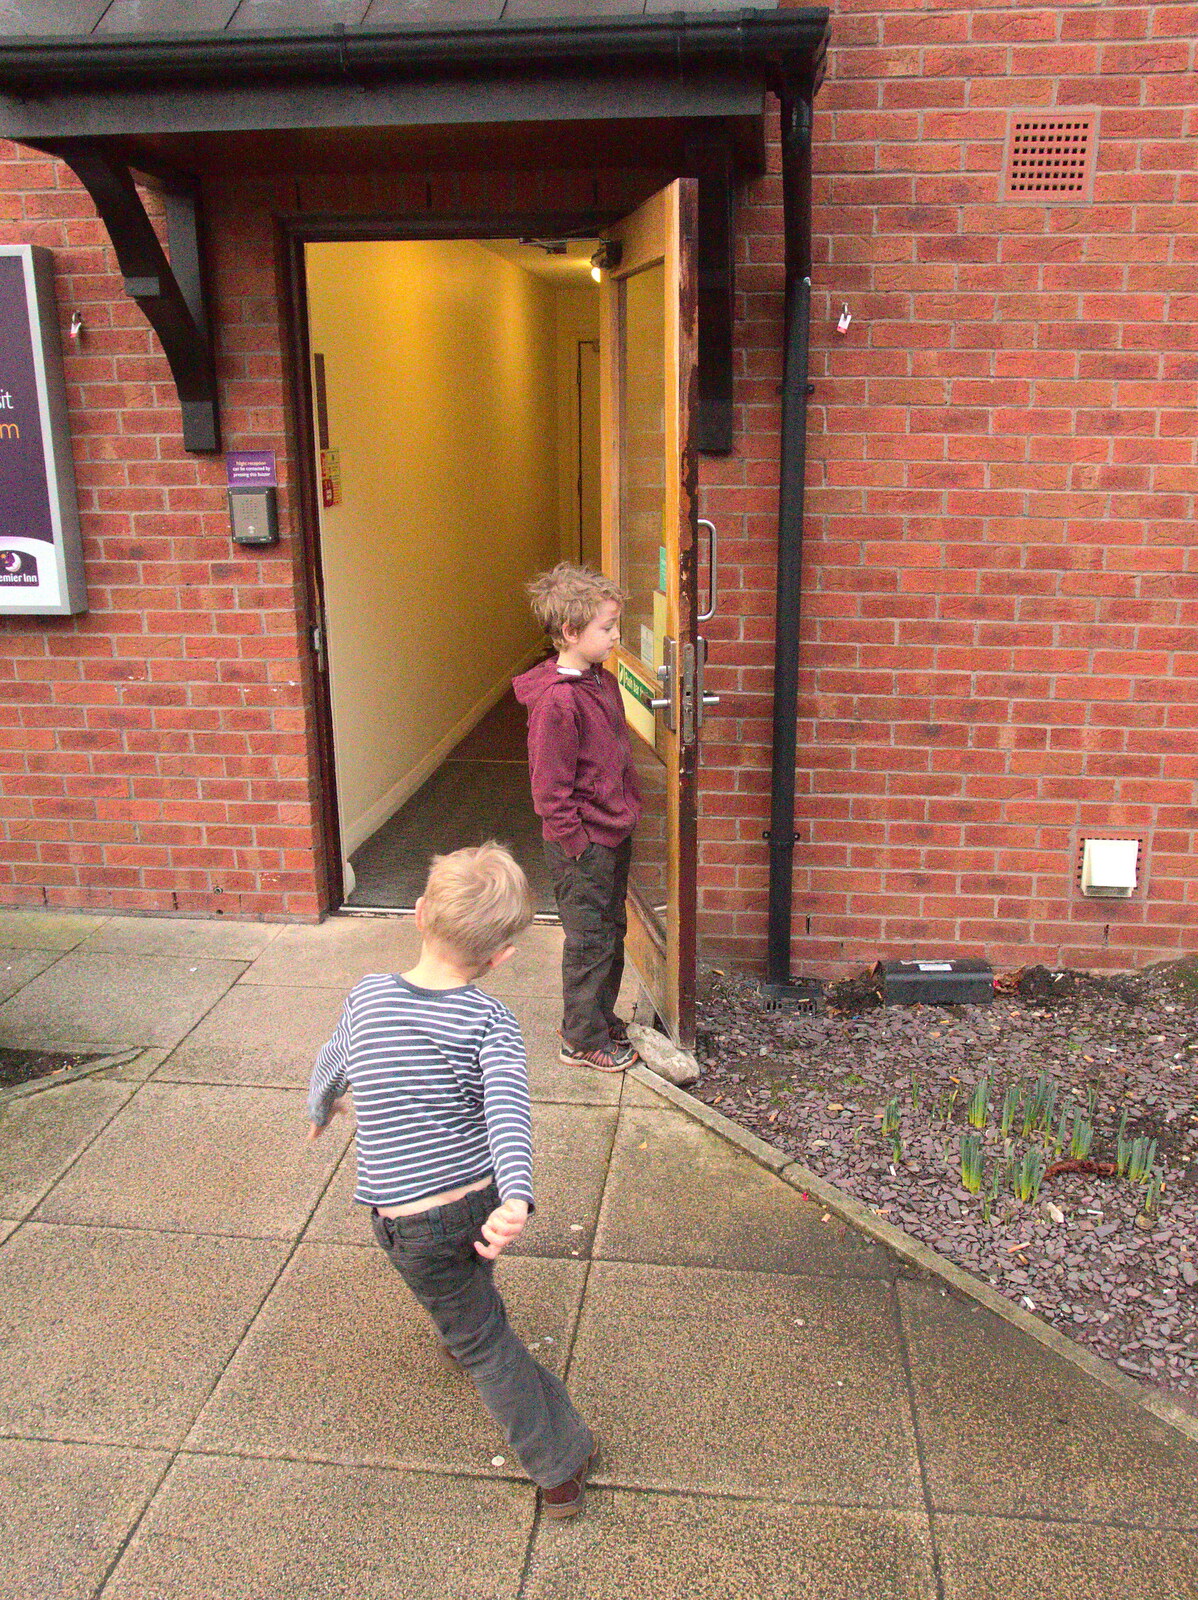 The boys run around near the exit from A Party and a Road Trip to Chester, Suffolk and Cheshire - 20th December 2015